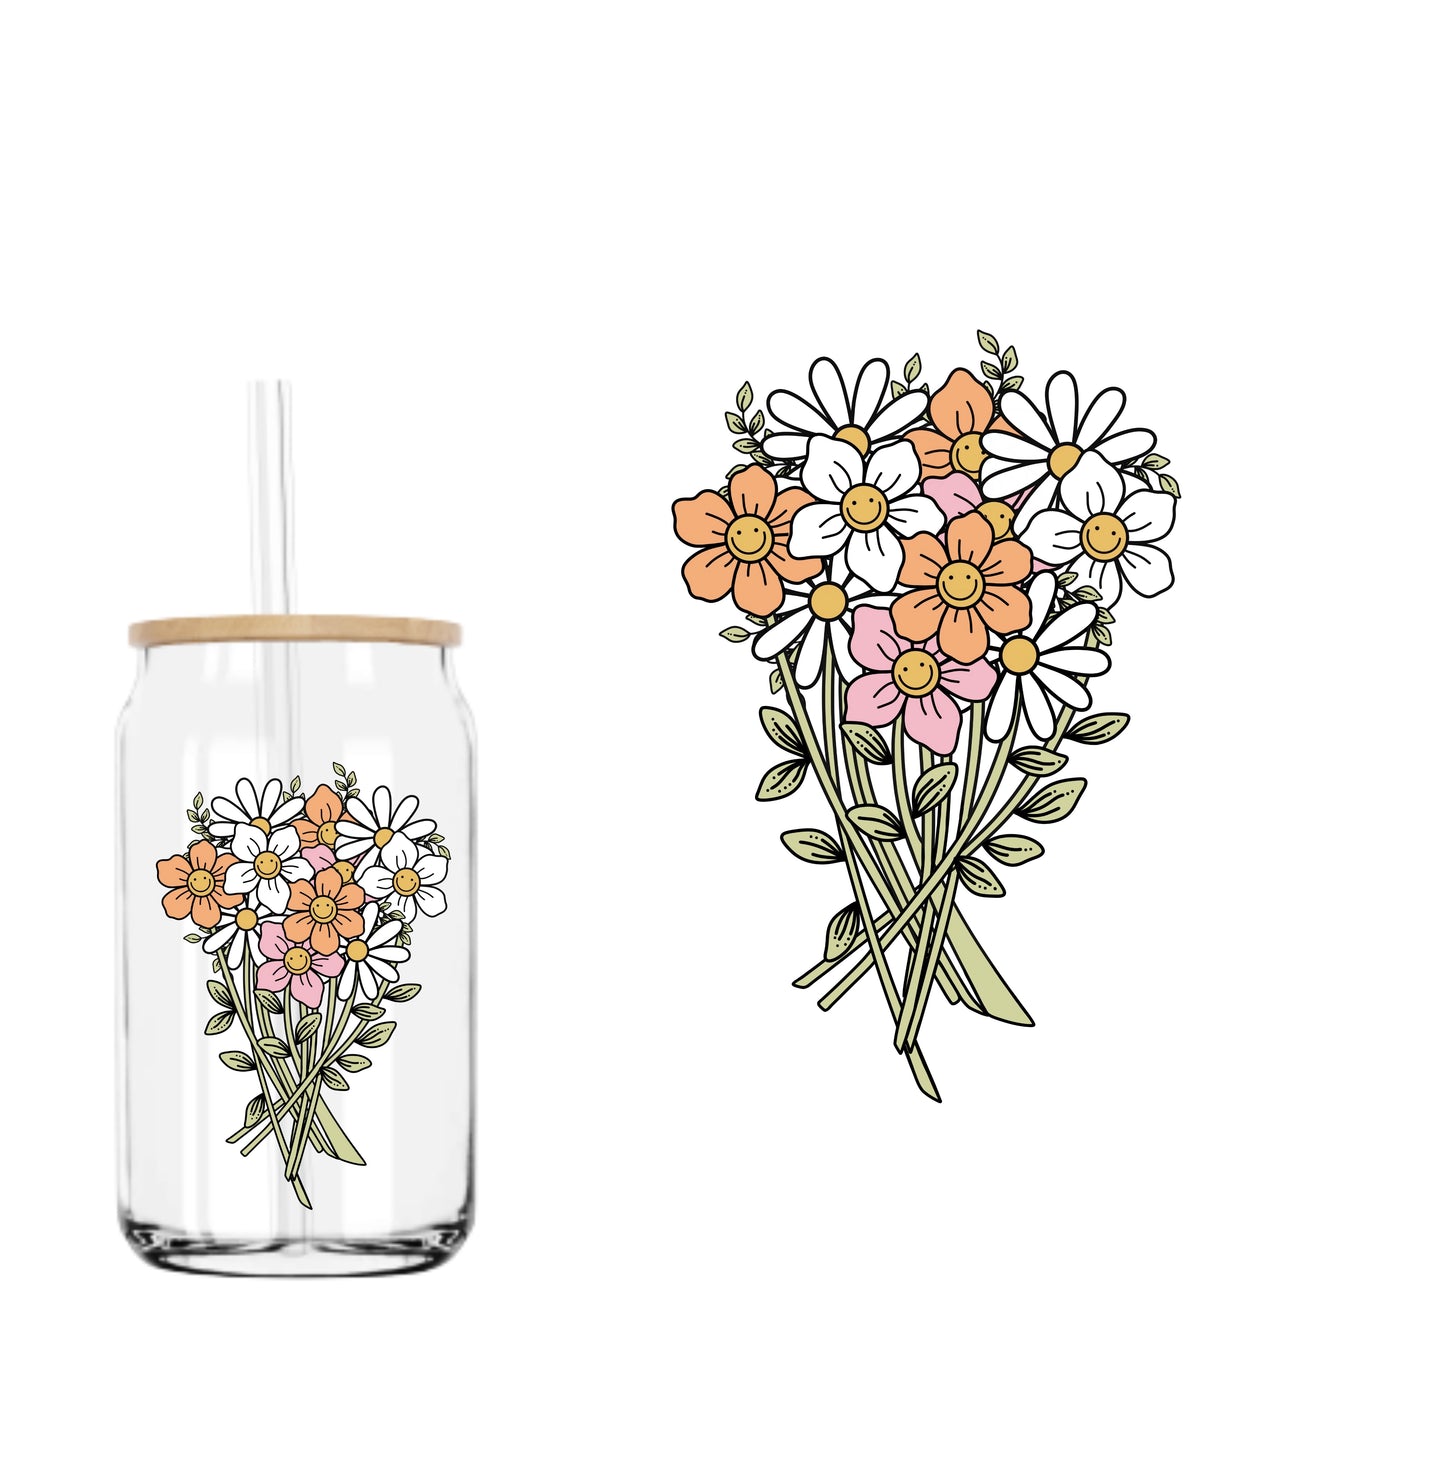 Happy Floral Stems UVDTF decal